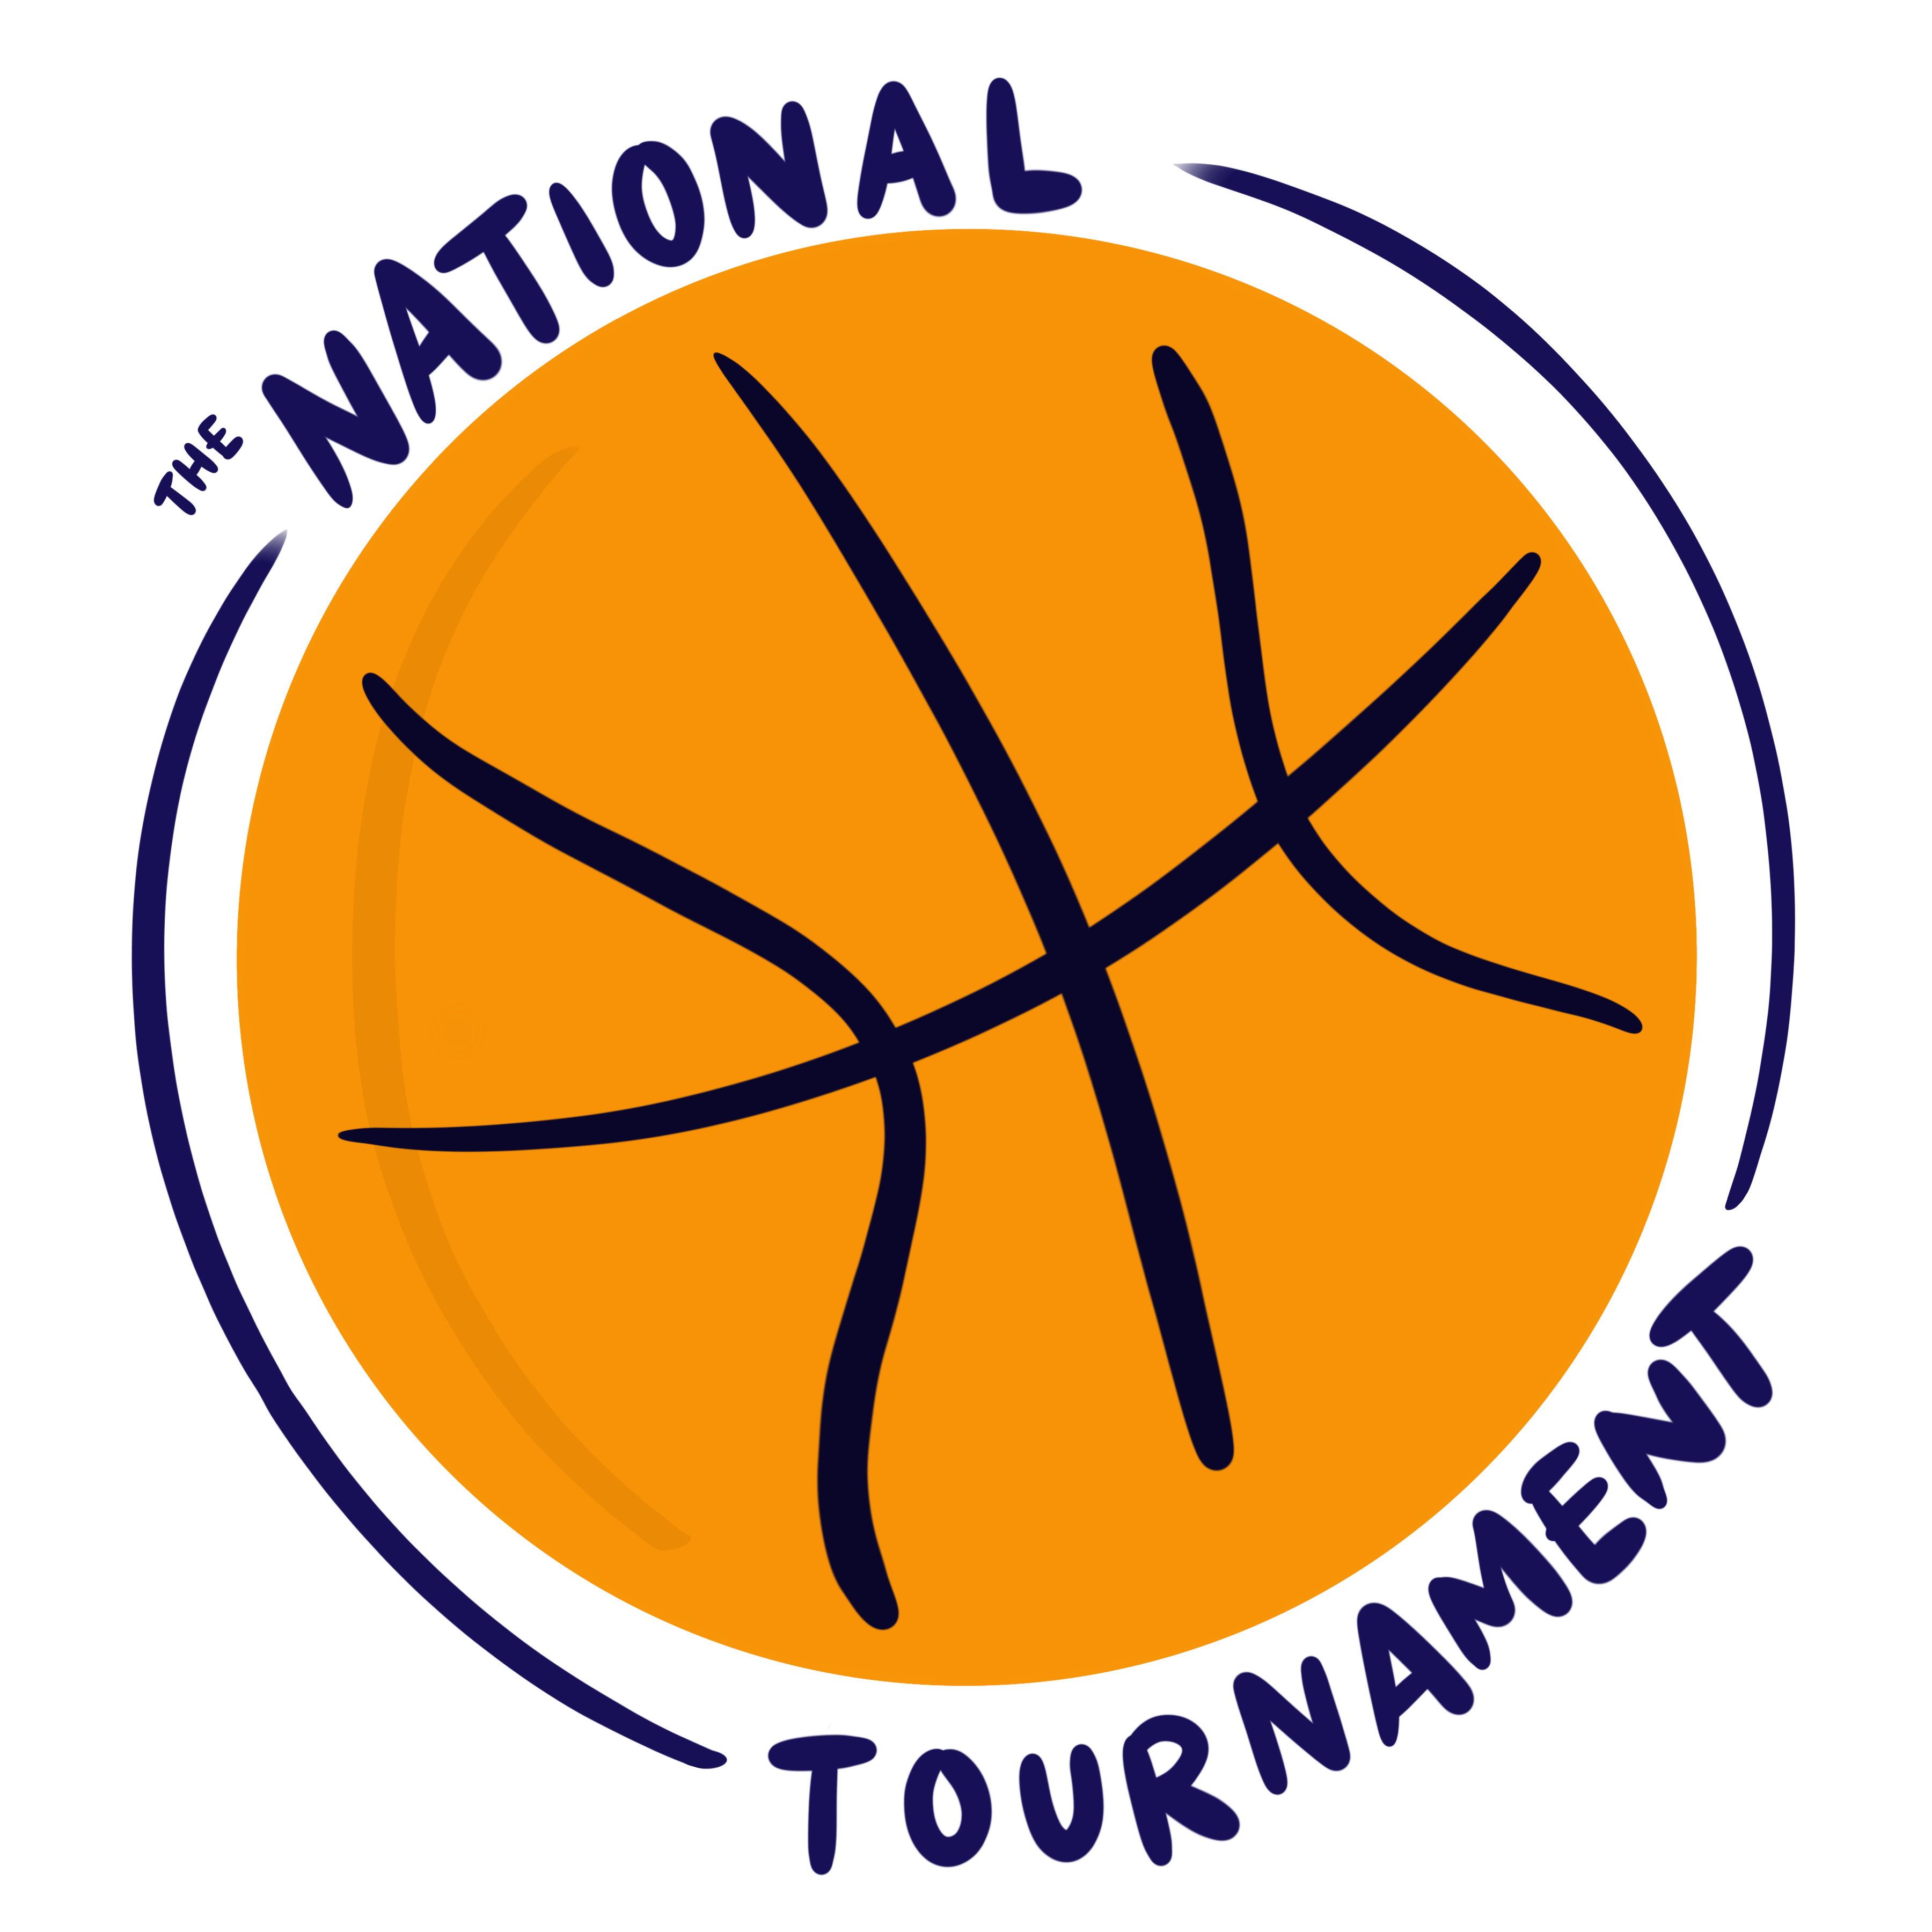 The National Tournament